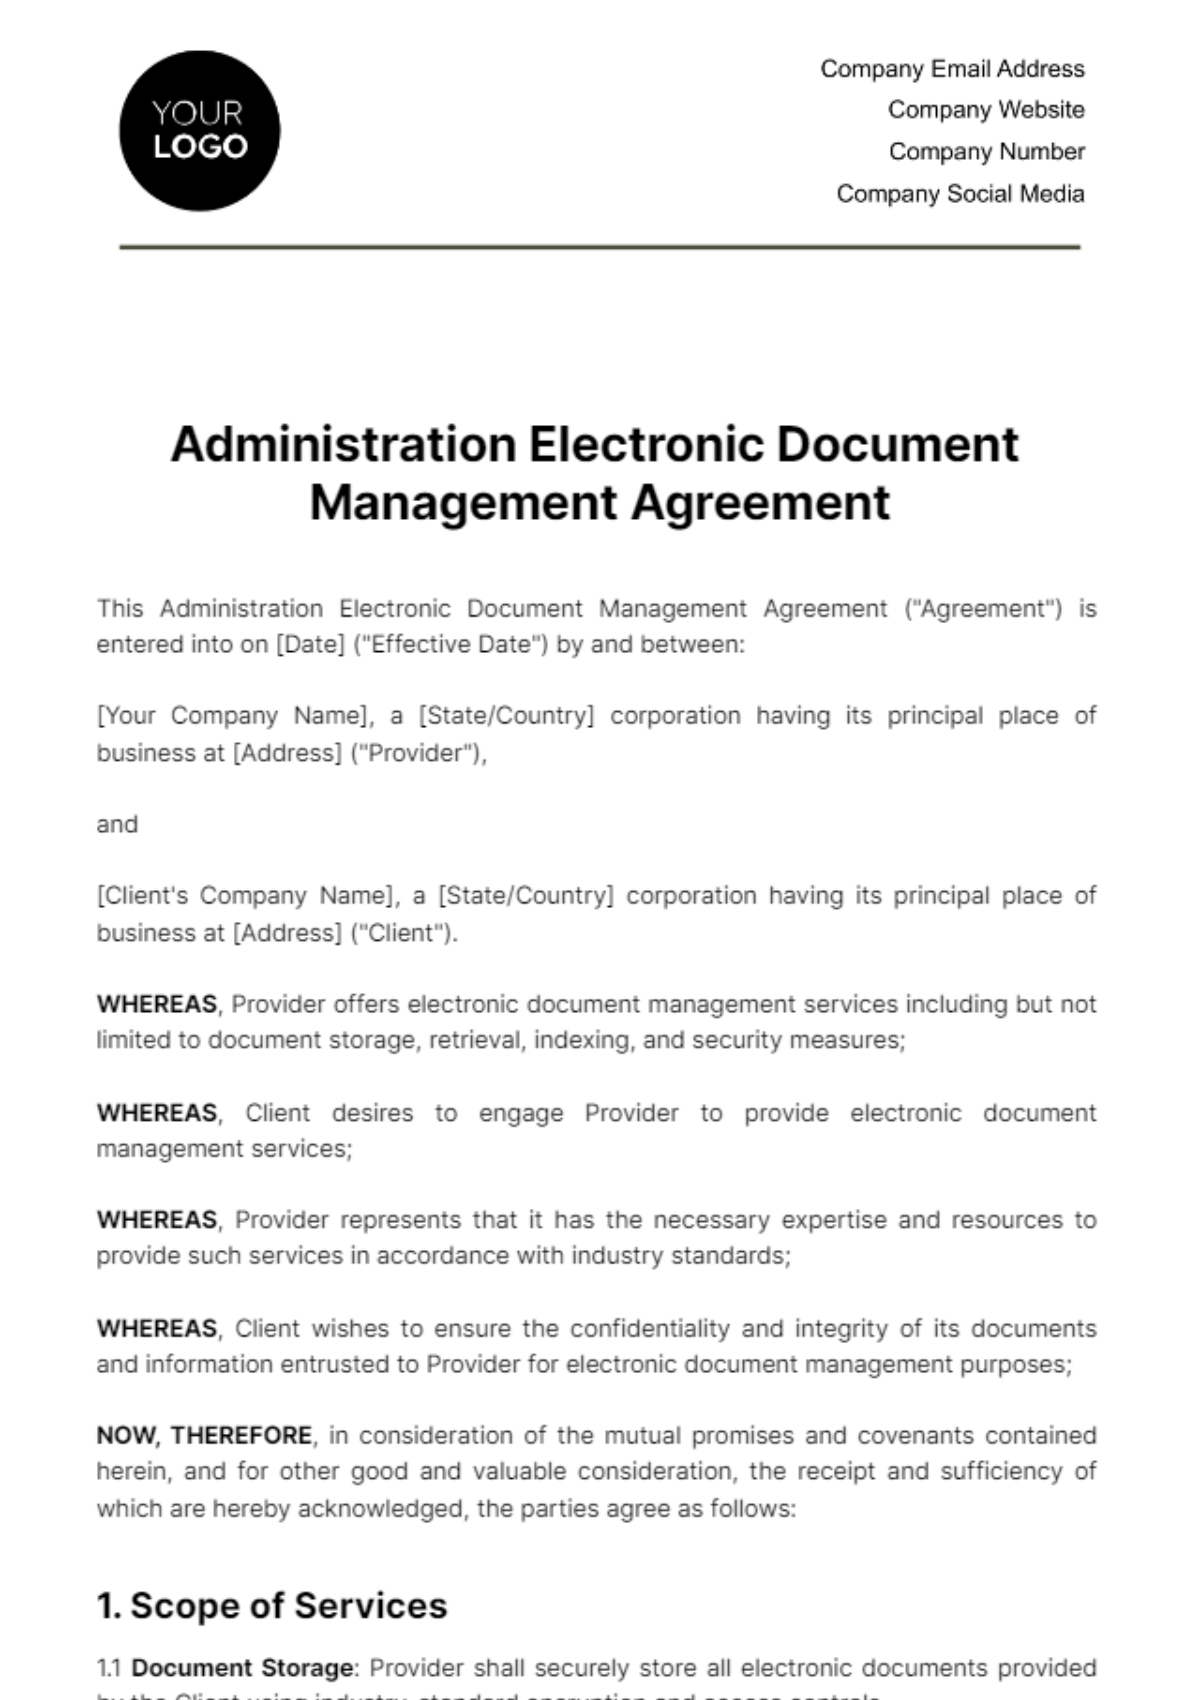 Administration Electronic Document Management Agreement Template